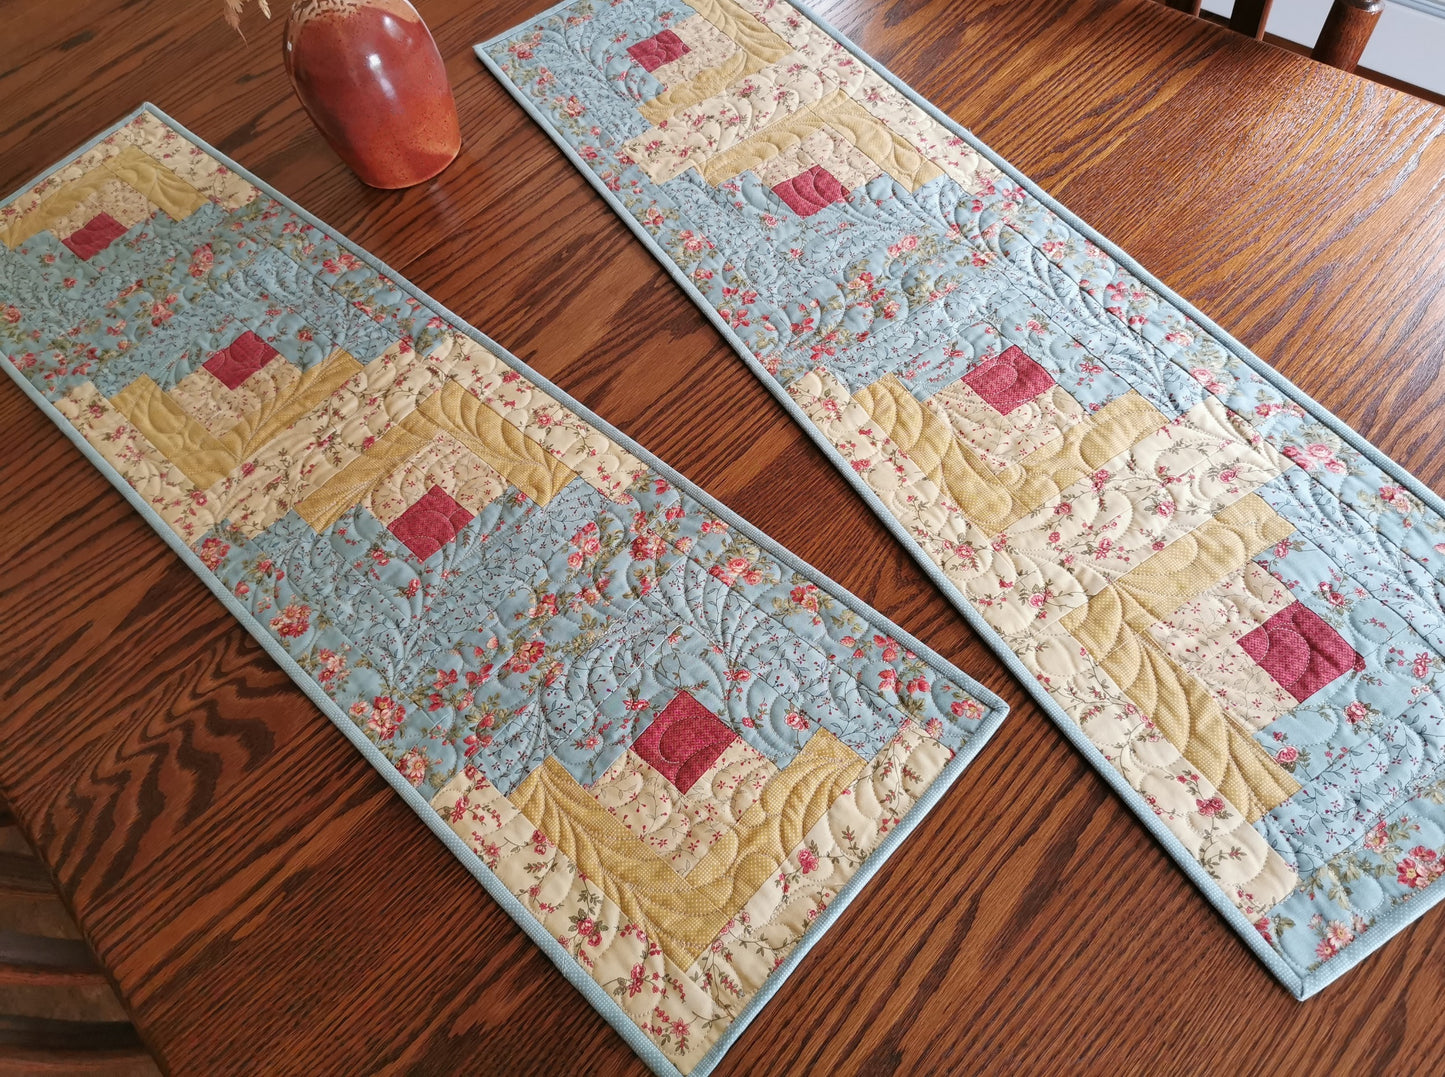 Log Cabin Quilted Table Runner in Teal and Yellow